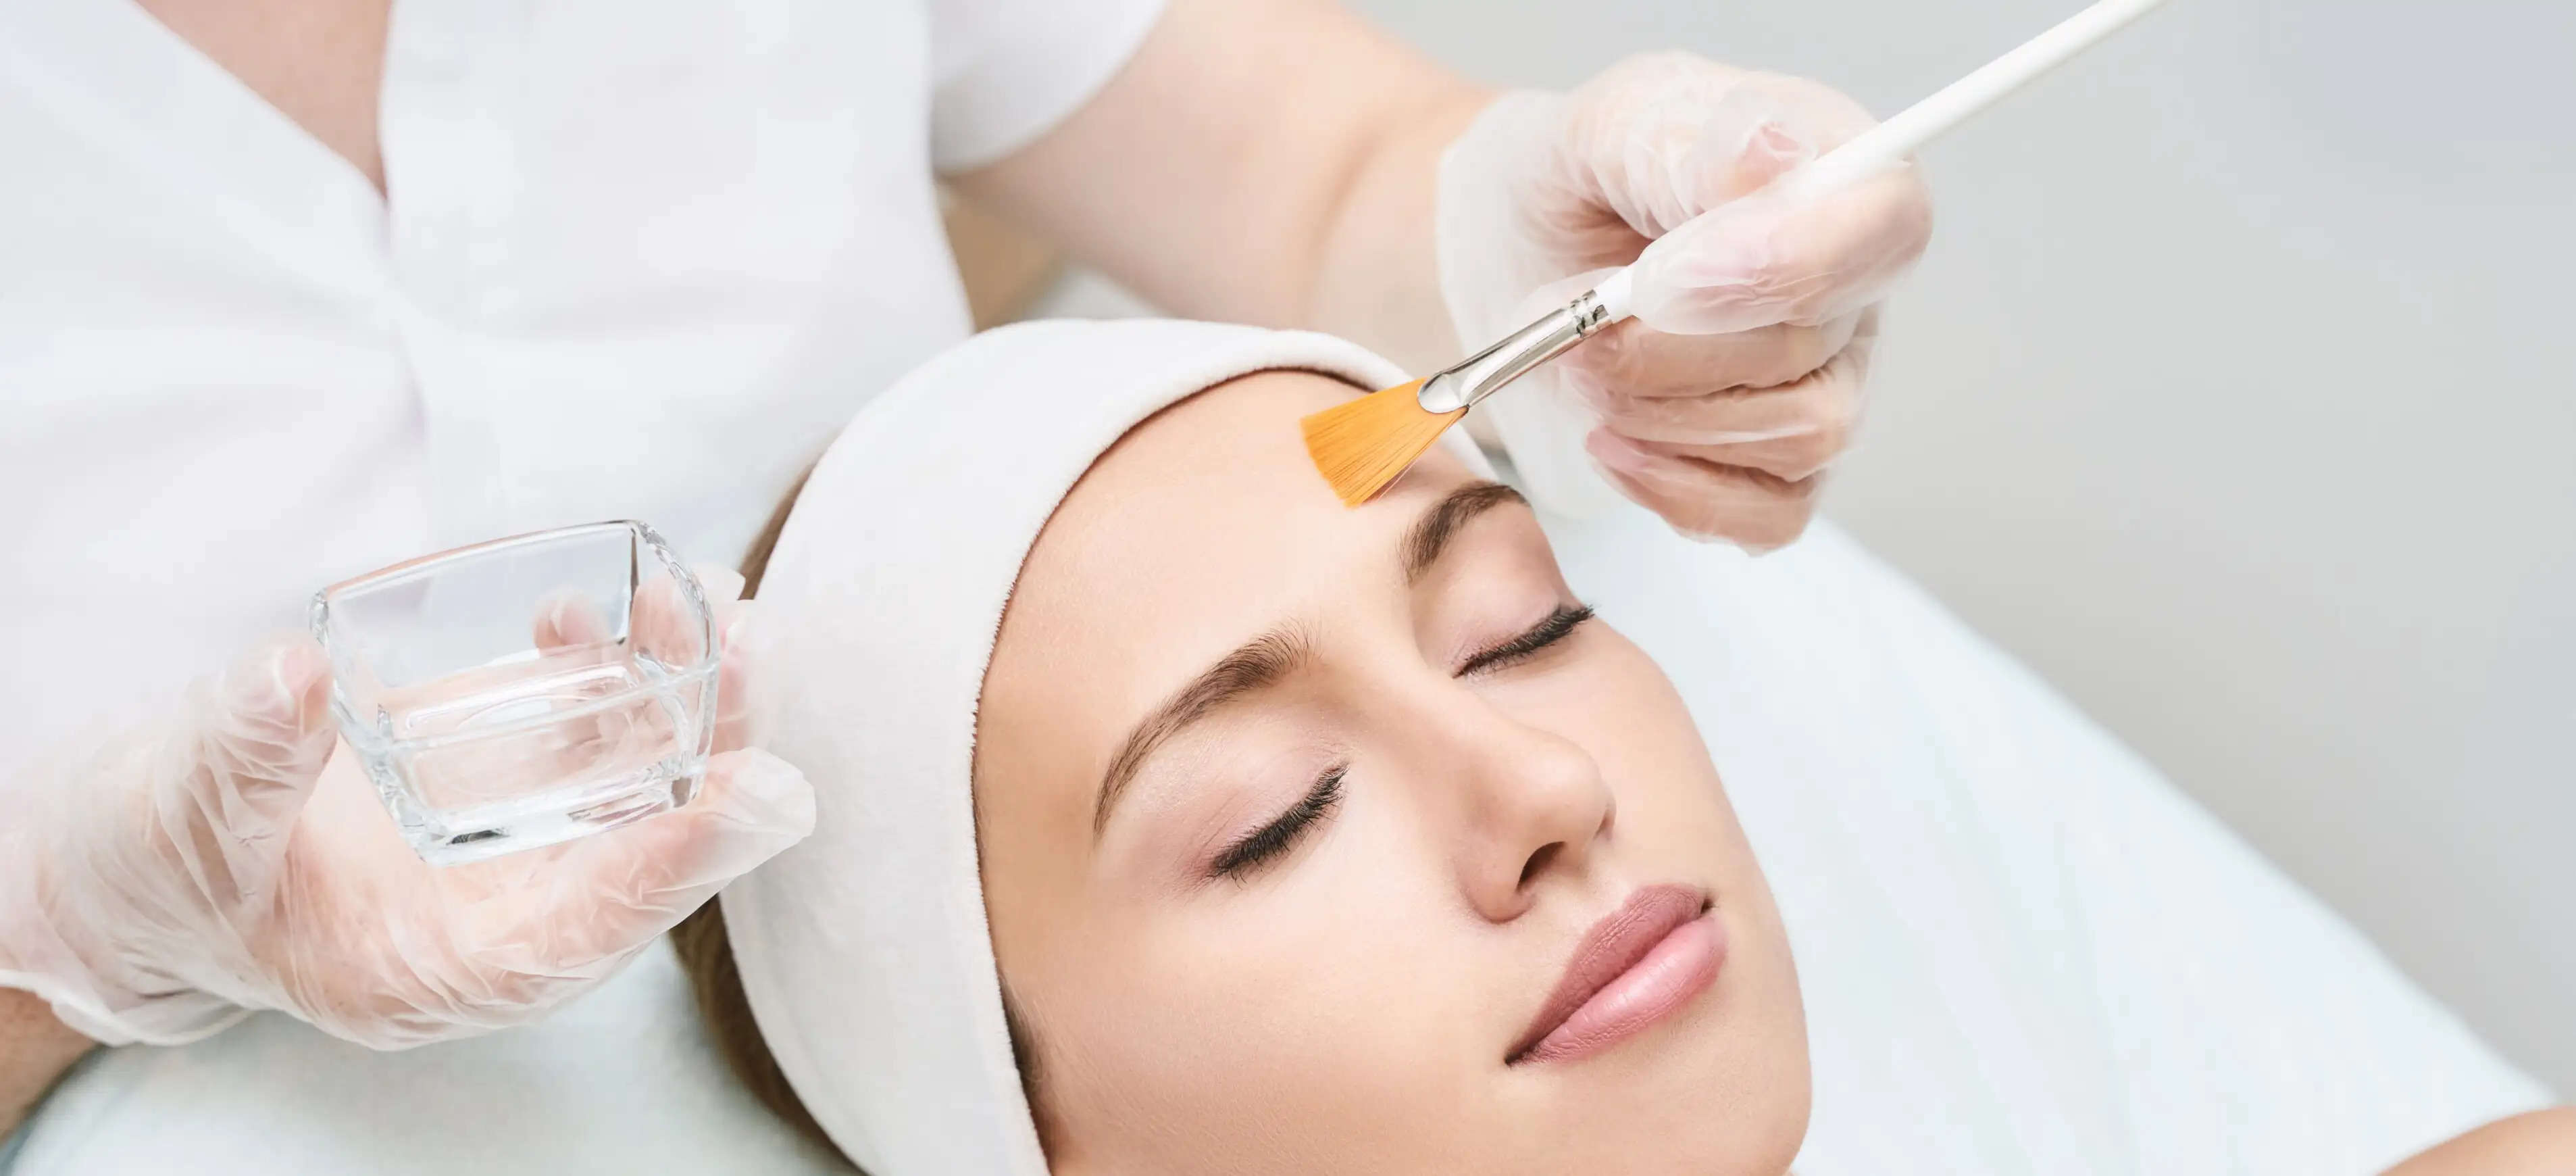 How can I get a new me with chemical peels?